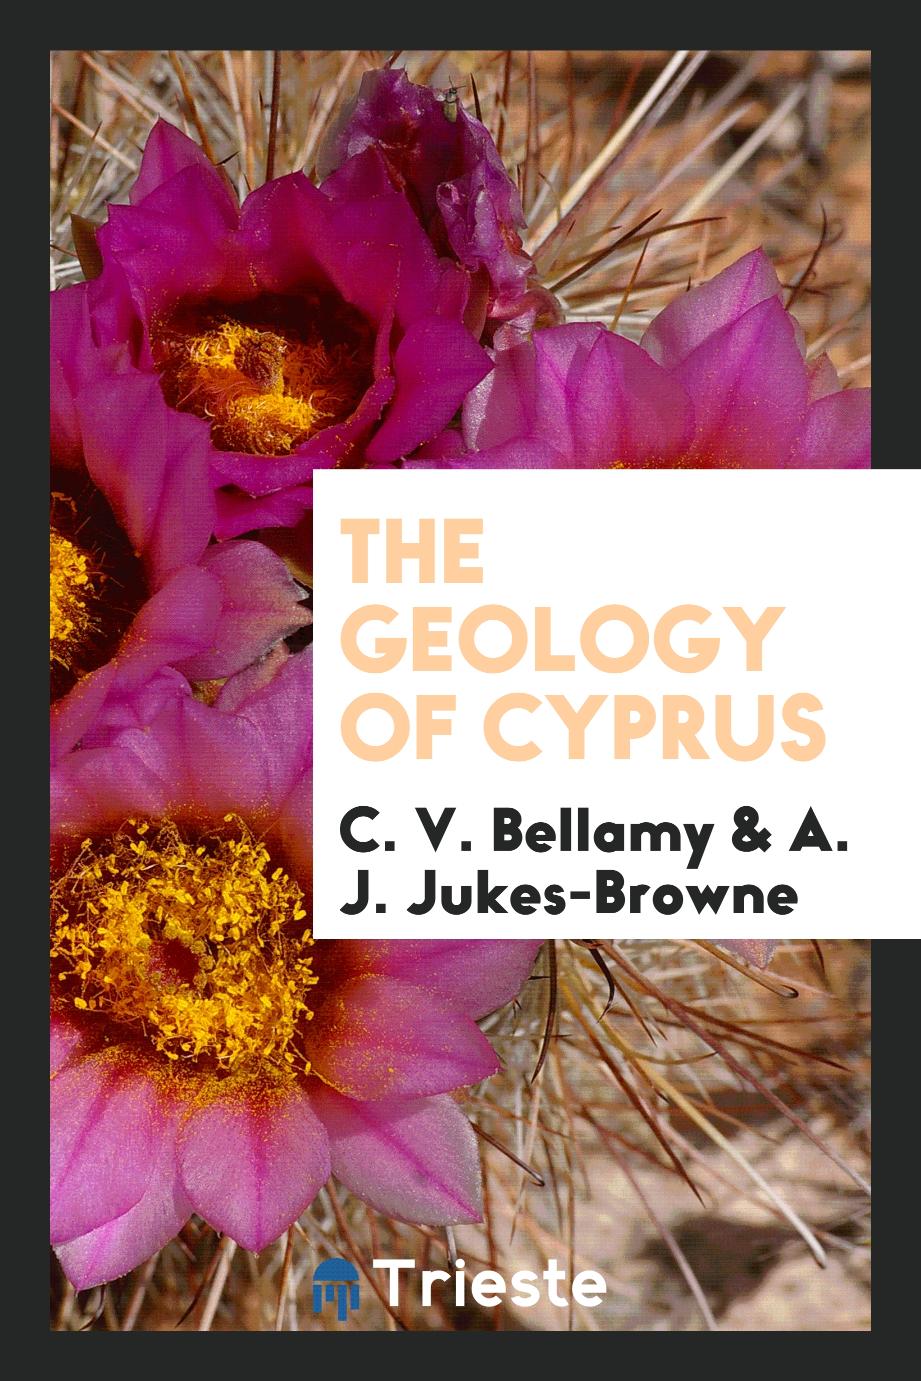 The Geology of Cyprus